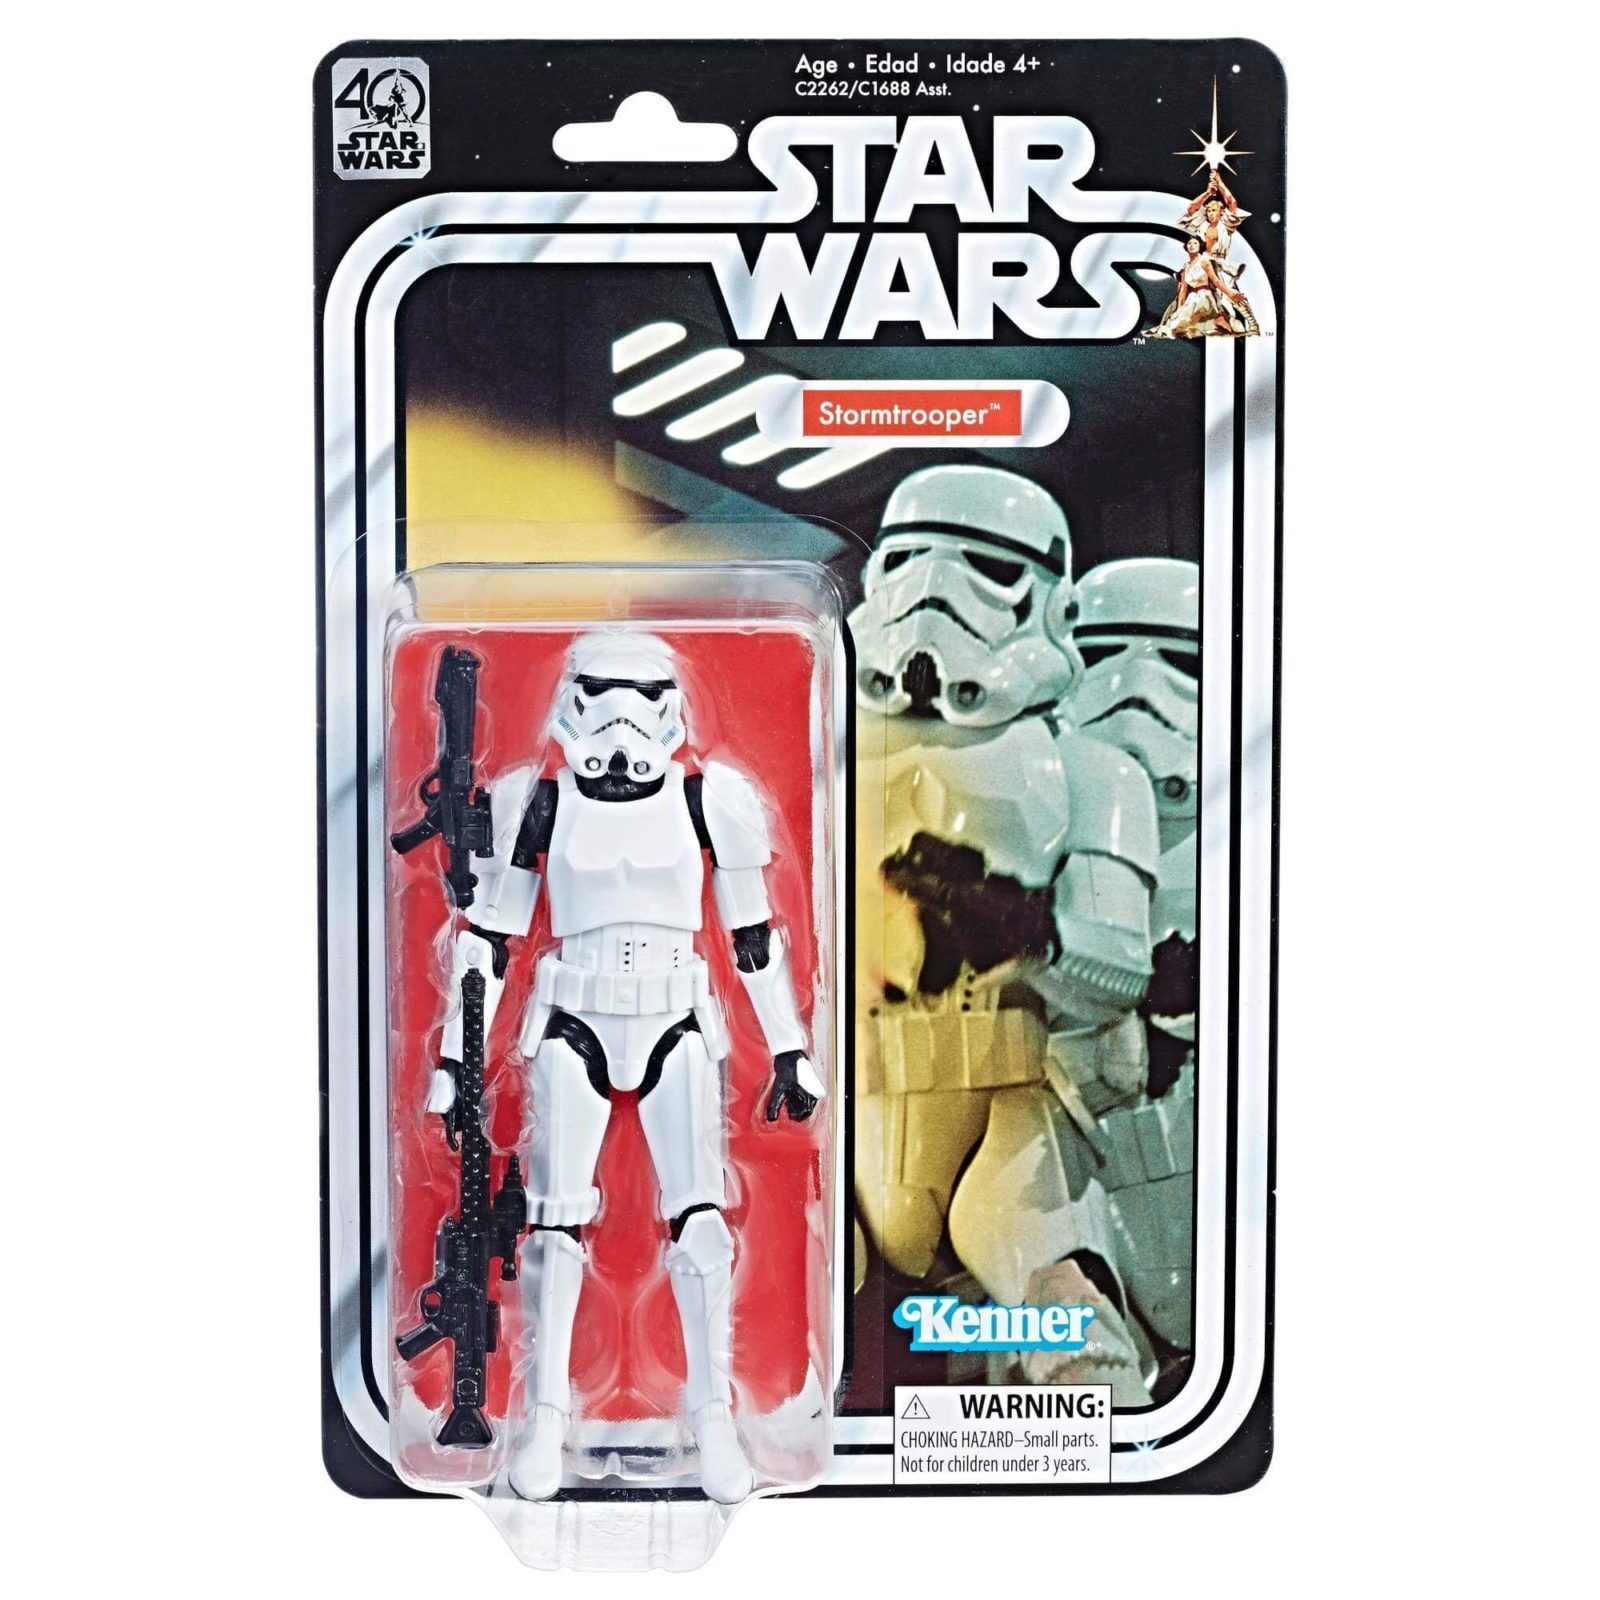 Star Wars The Black Series 40th Anniversary Action Figure Stormtrooper